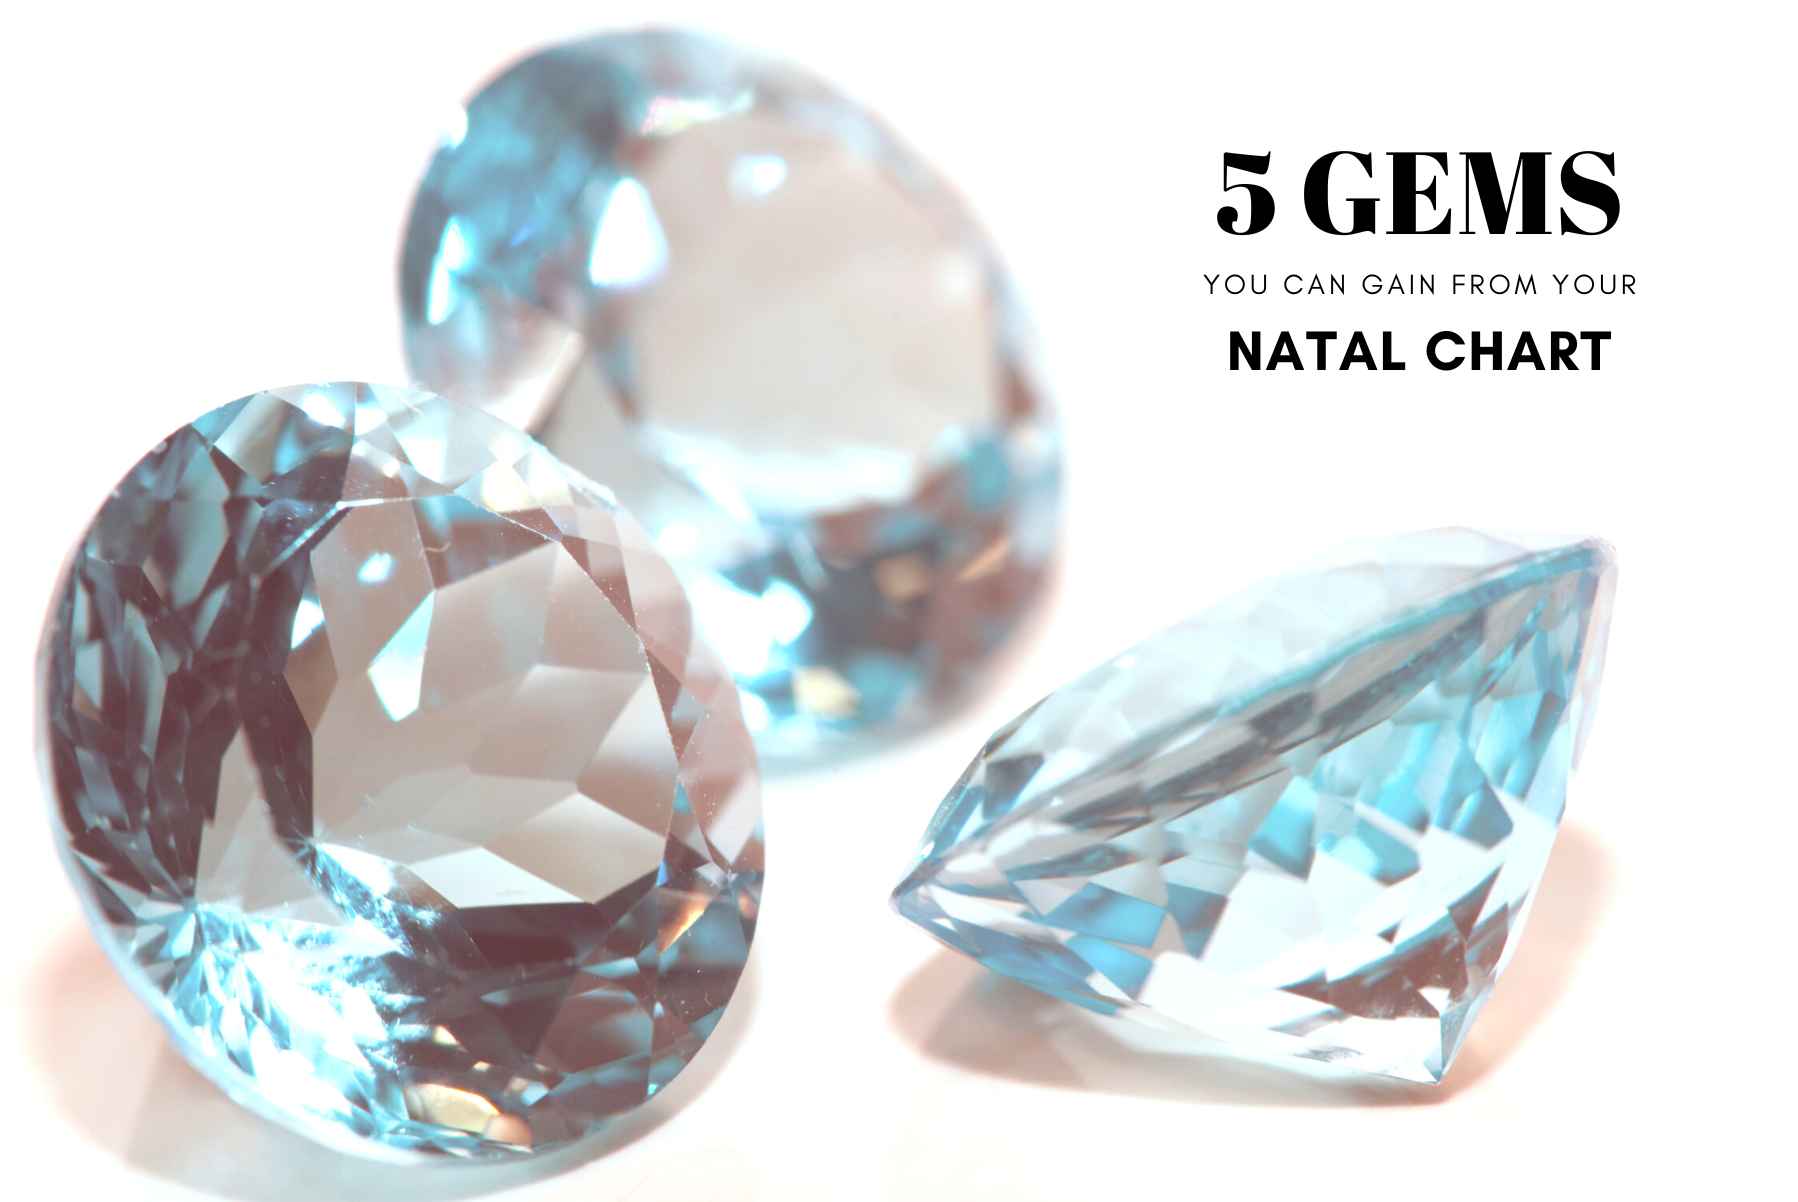 5 Gems You Can Gain From Your Natal Chart